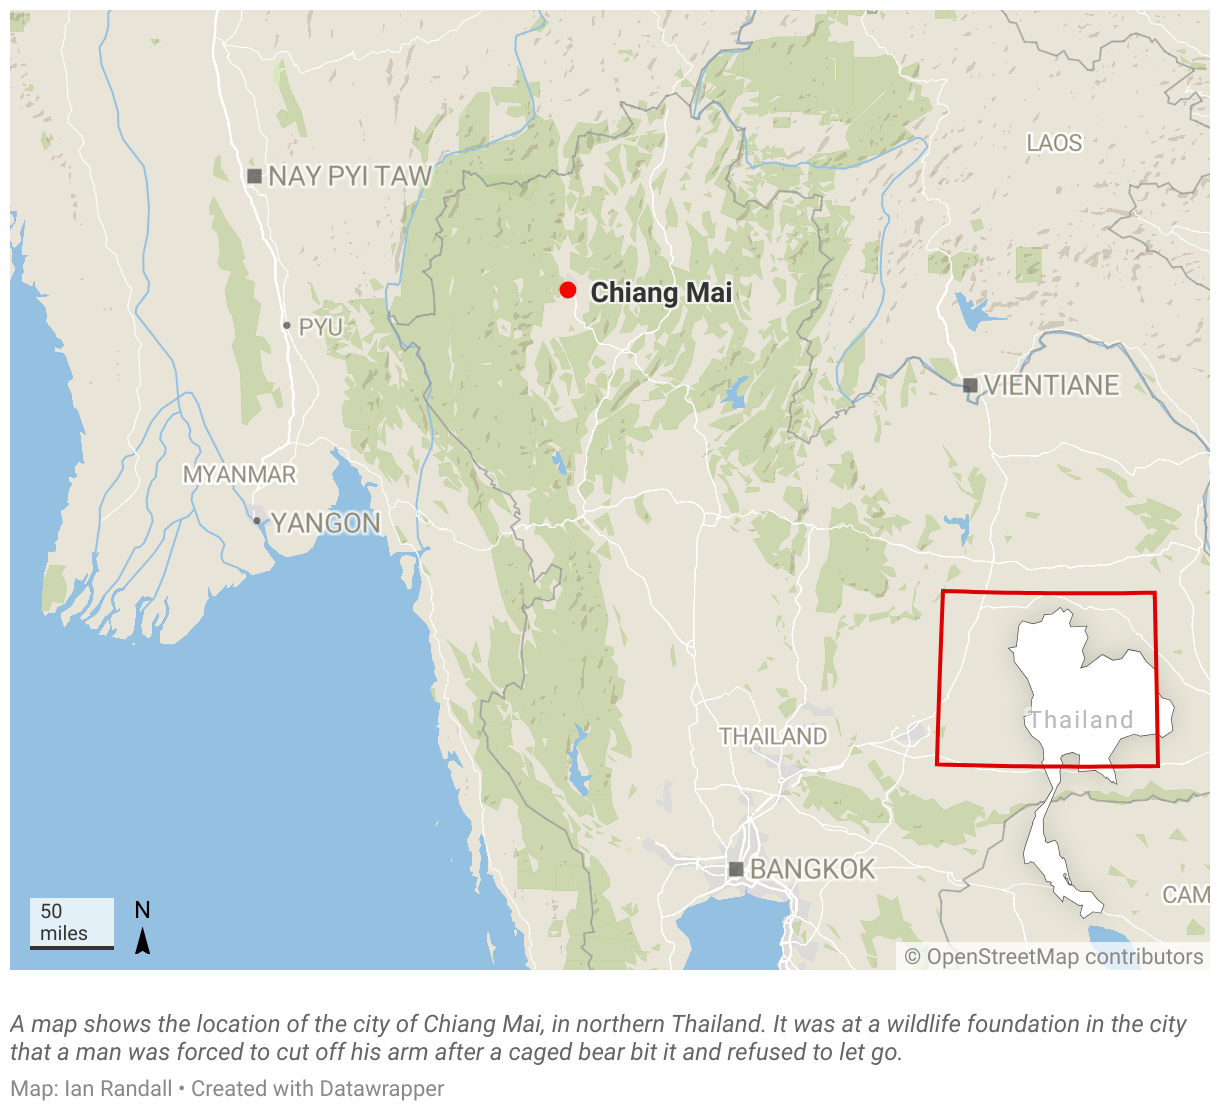 A map shows the location of the city of Chiang Mai, in northern Thailand.